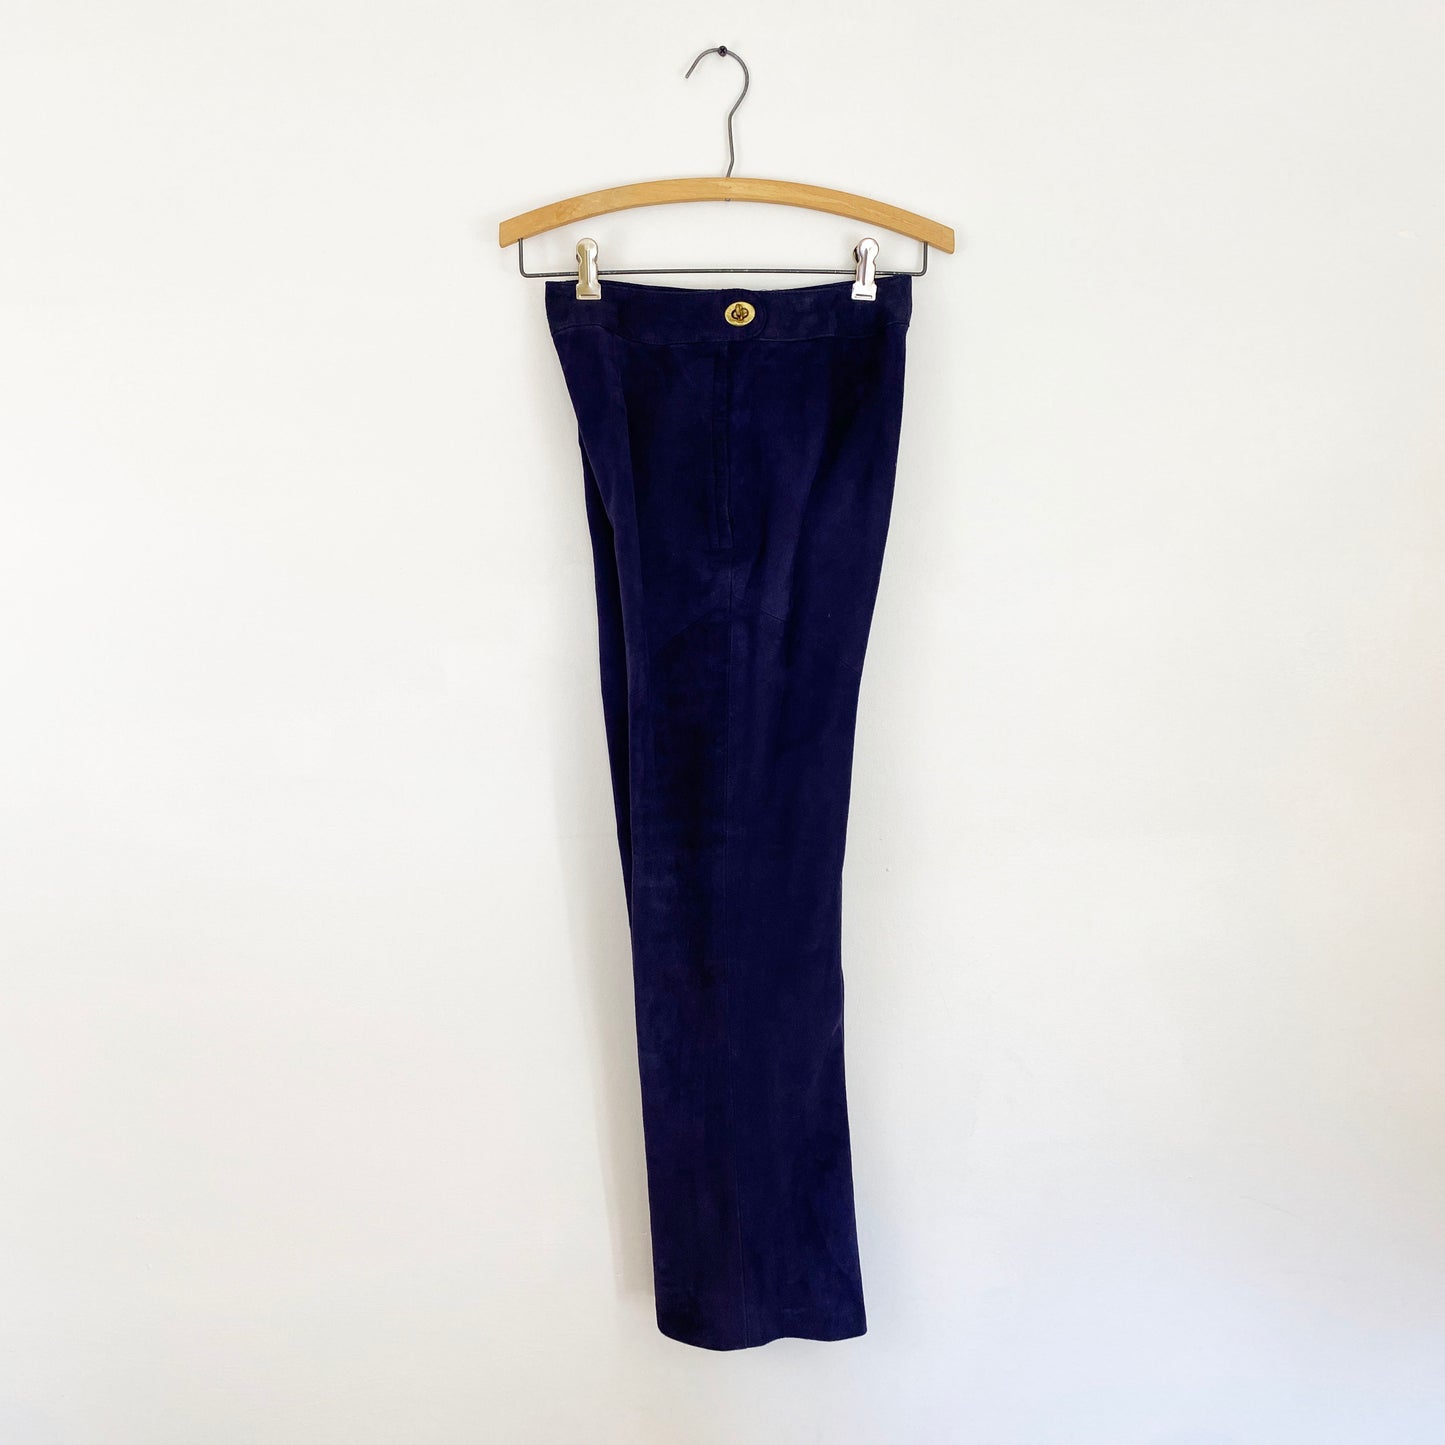 1960-1970s Bonnie Cashin Sills Navy Suede Straight Leg Pants with Side Turn Lock Closure / Size XS/S